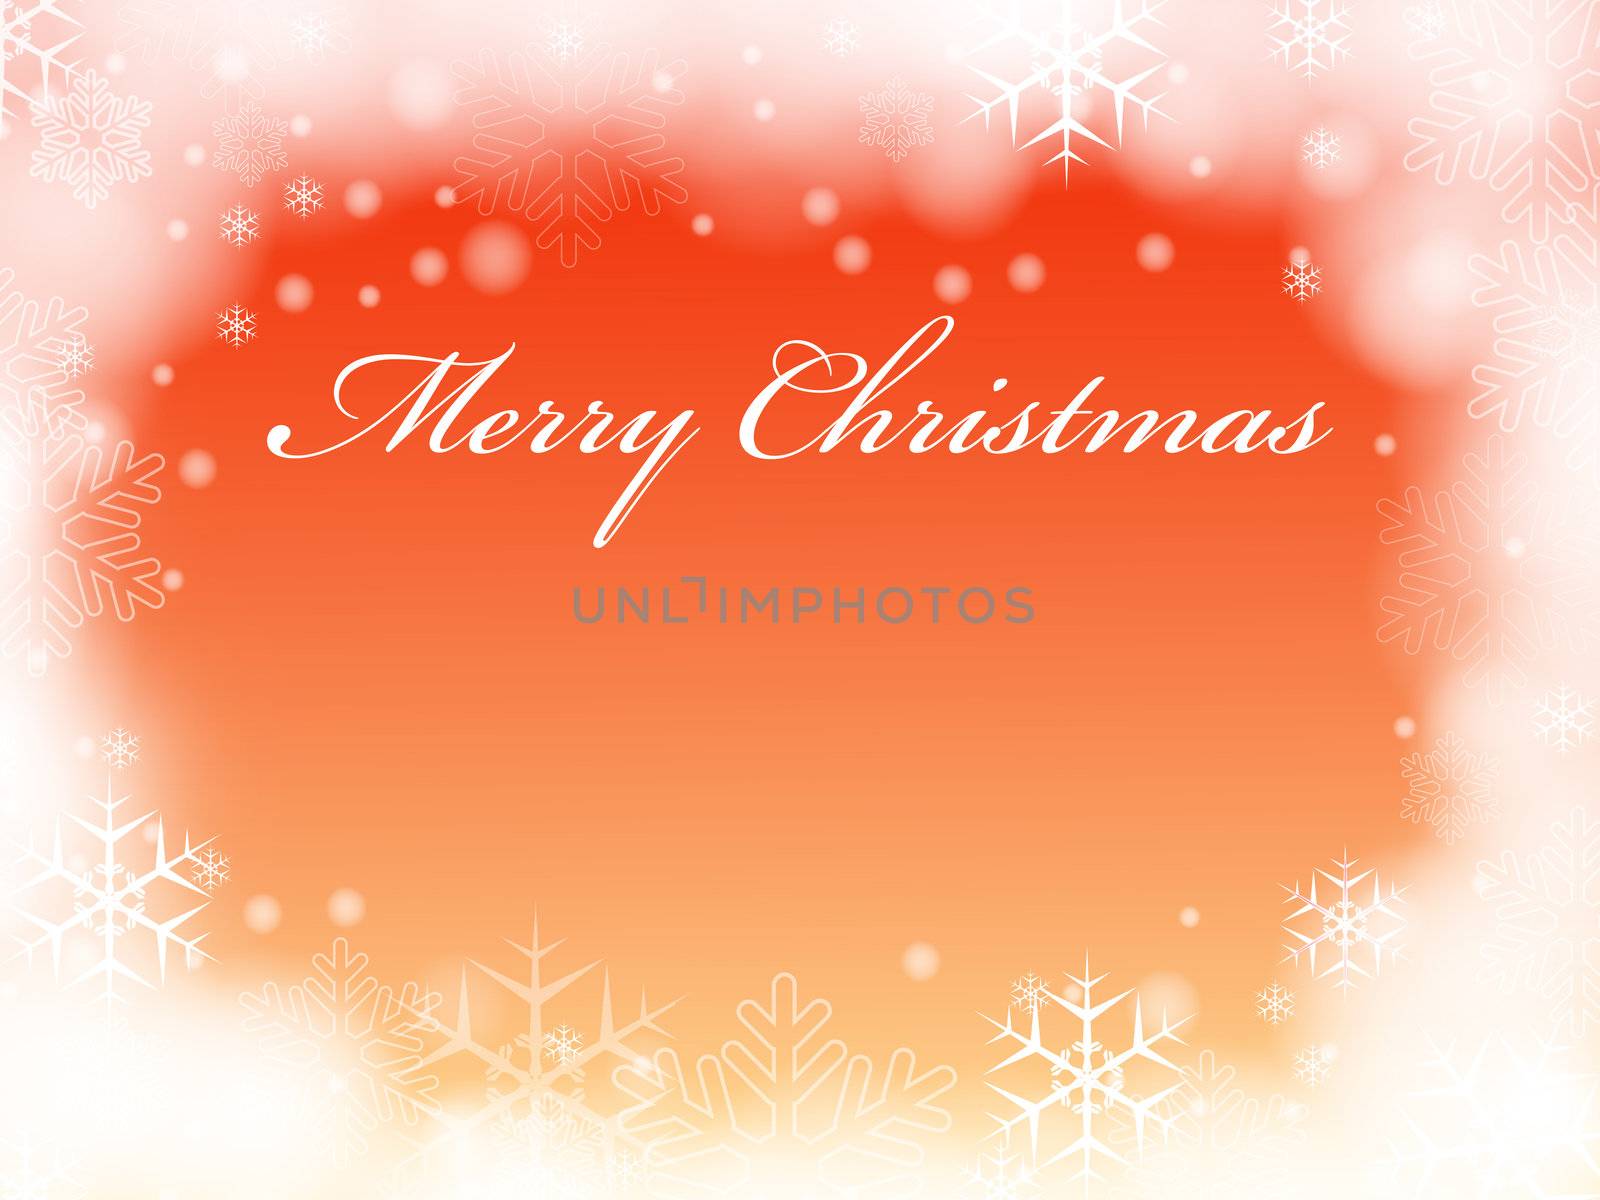 orange background with snowflakes and text - Merry Christmas